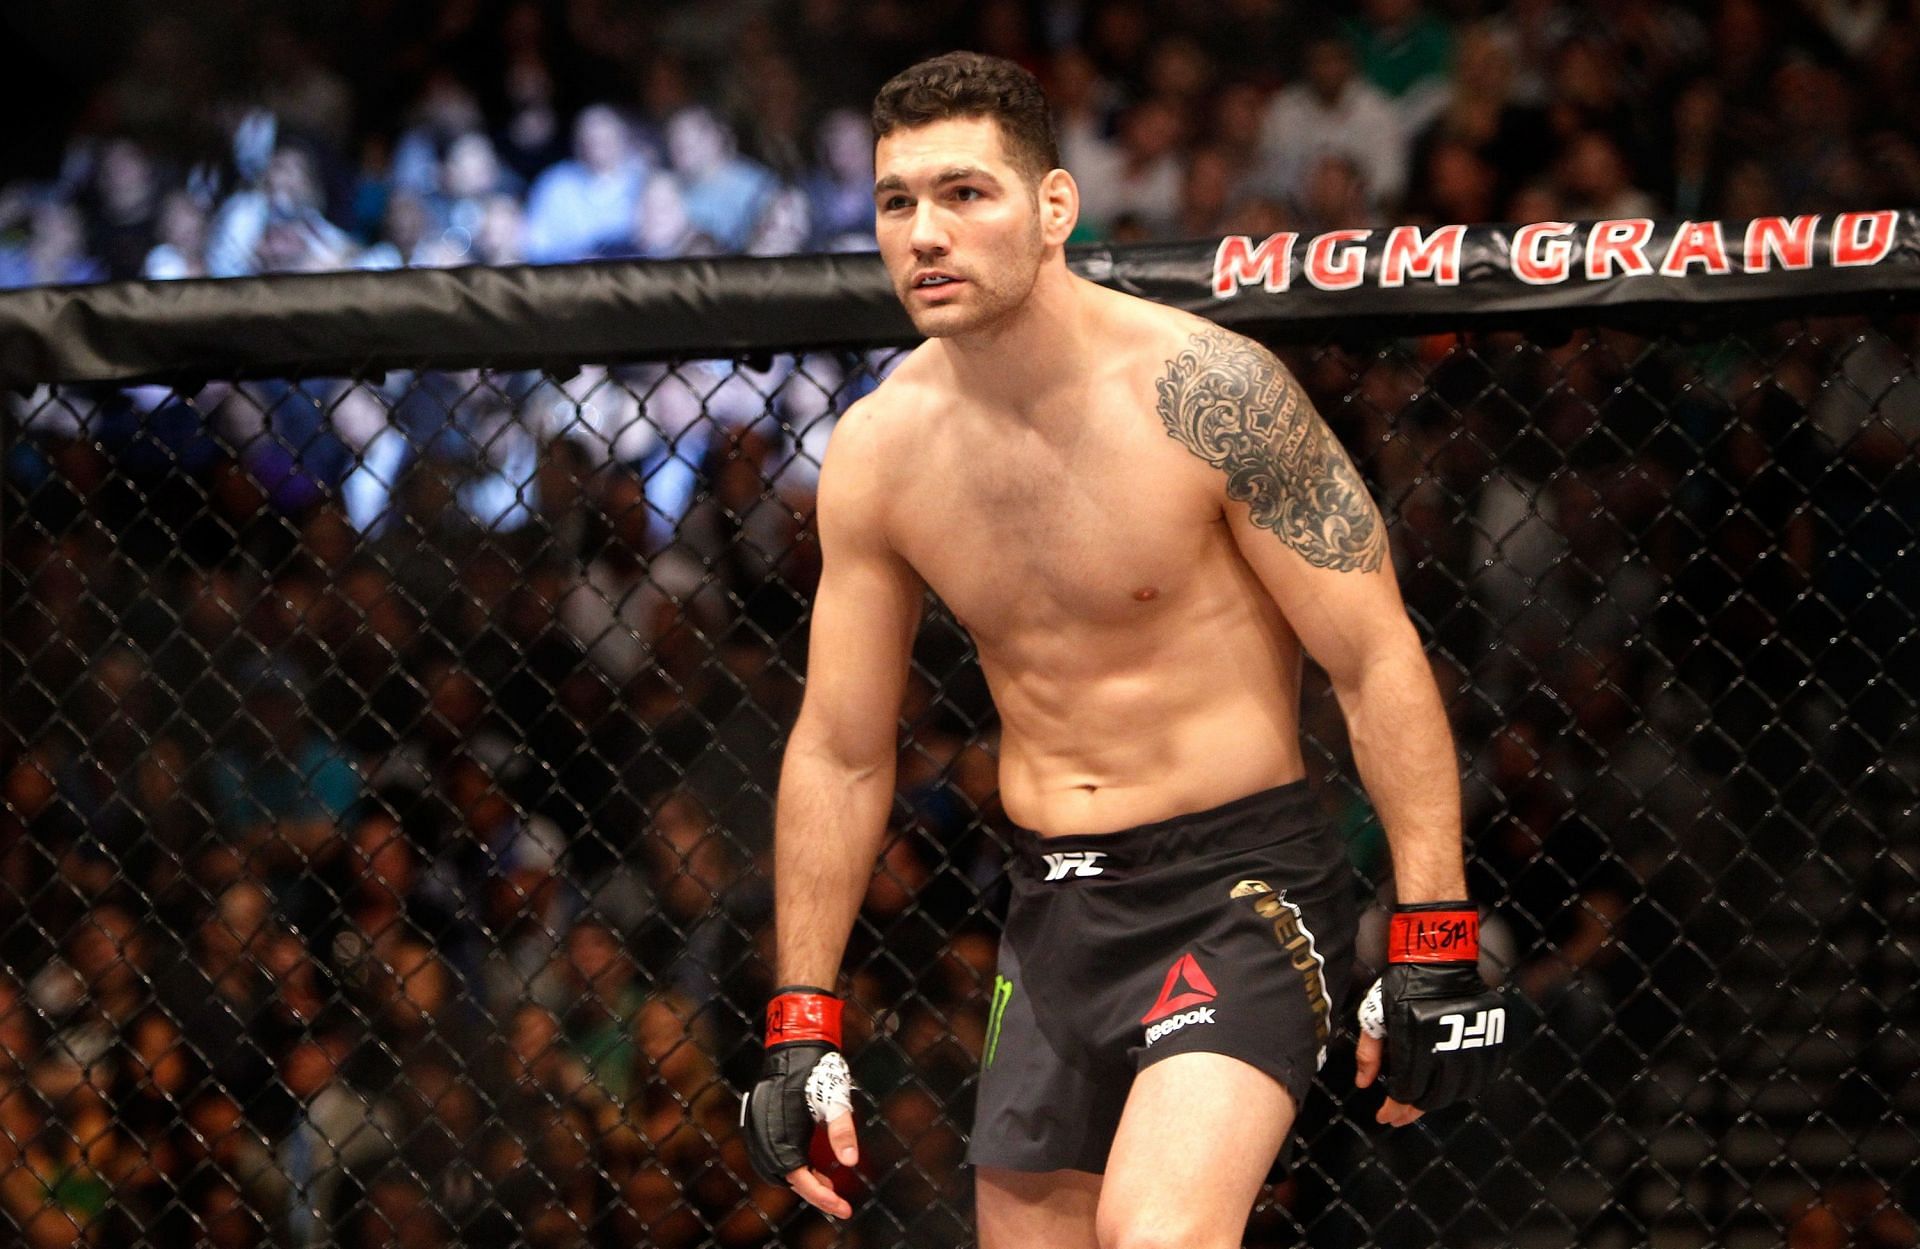 Chris Weidman famously stunned Anderson Silva twice in 2013